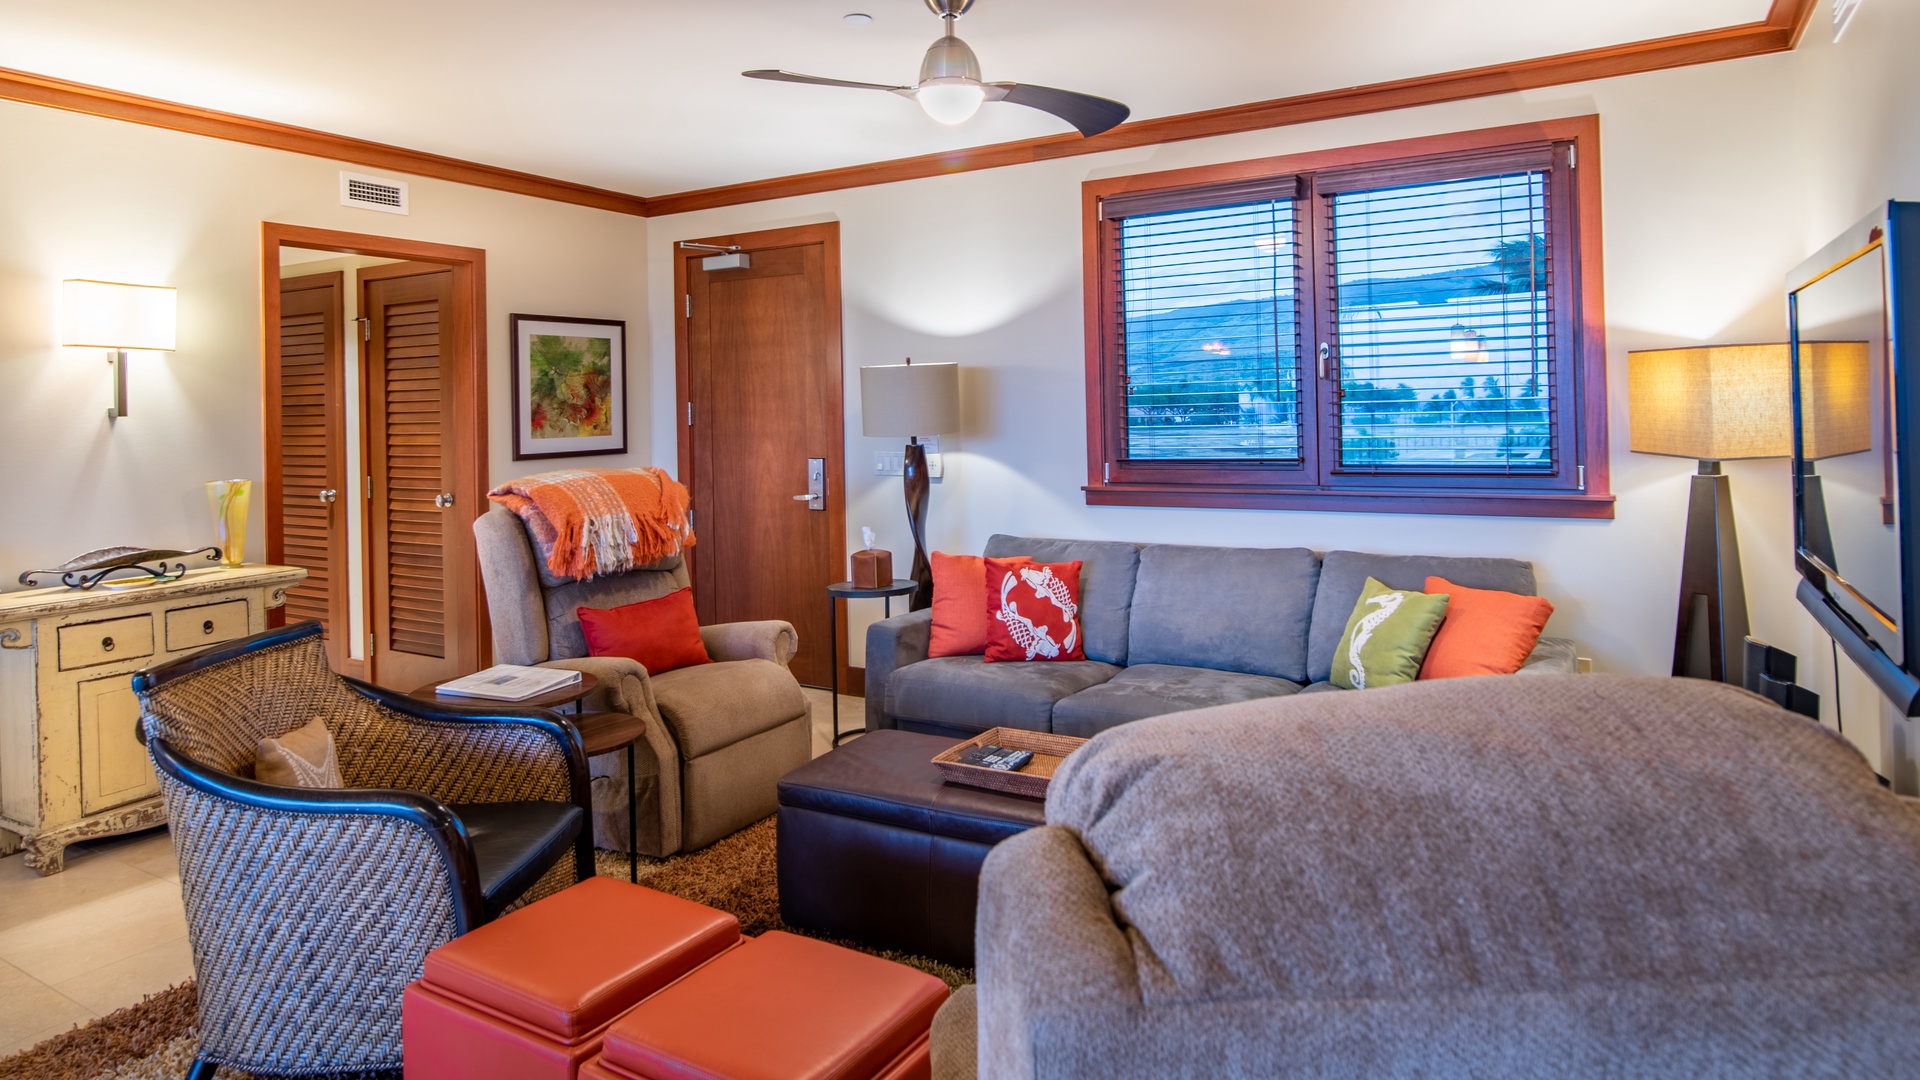 Kapolei Vacation Rentals, Ko Olina Beach Villas B301 - Relax in the comfort of your own abode and enjoy movie night on the TV.